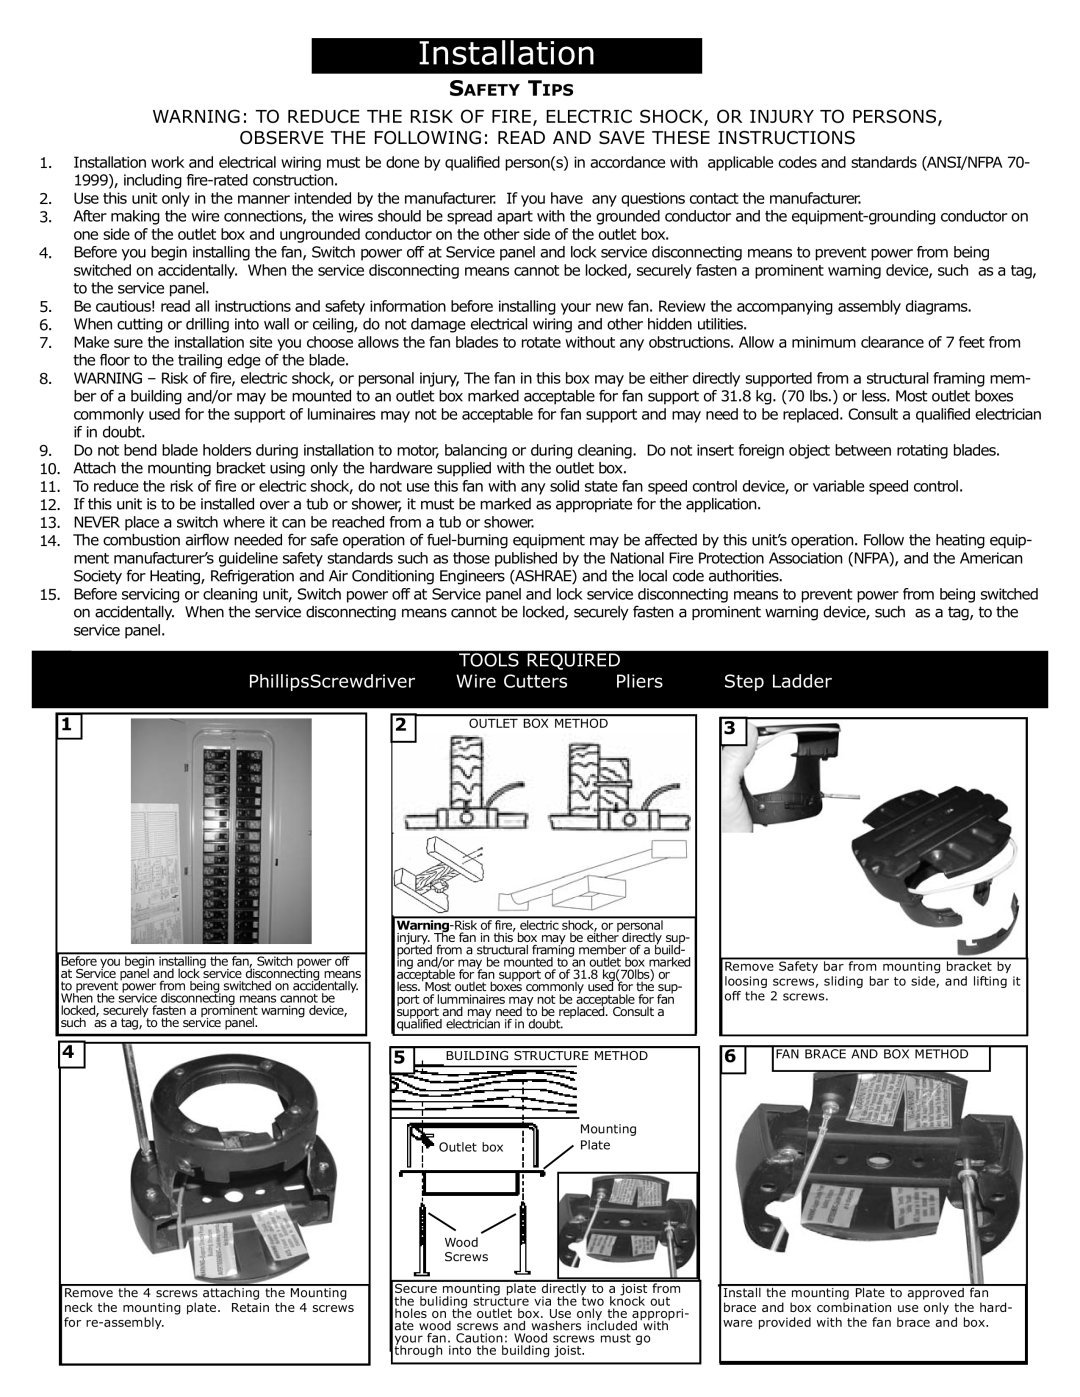 Monte Carlo Fan Company 5GL66 Series owner manual PhillipsScrewdriver, Wire Cutters, Pliers, Step Ladder, Safety Tips 